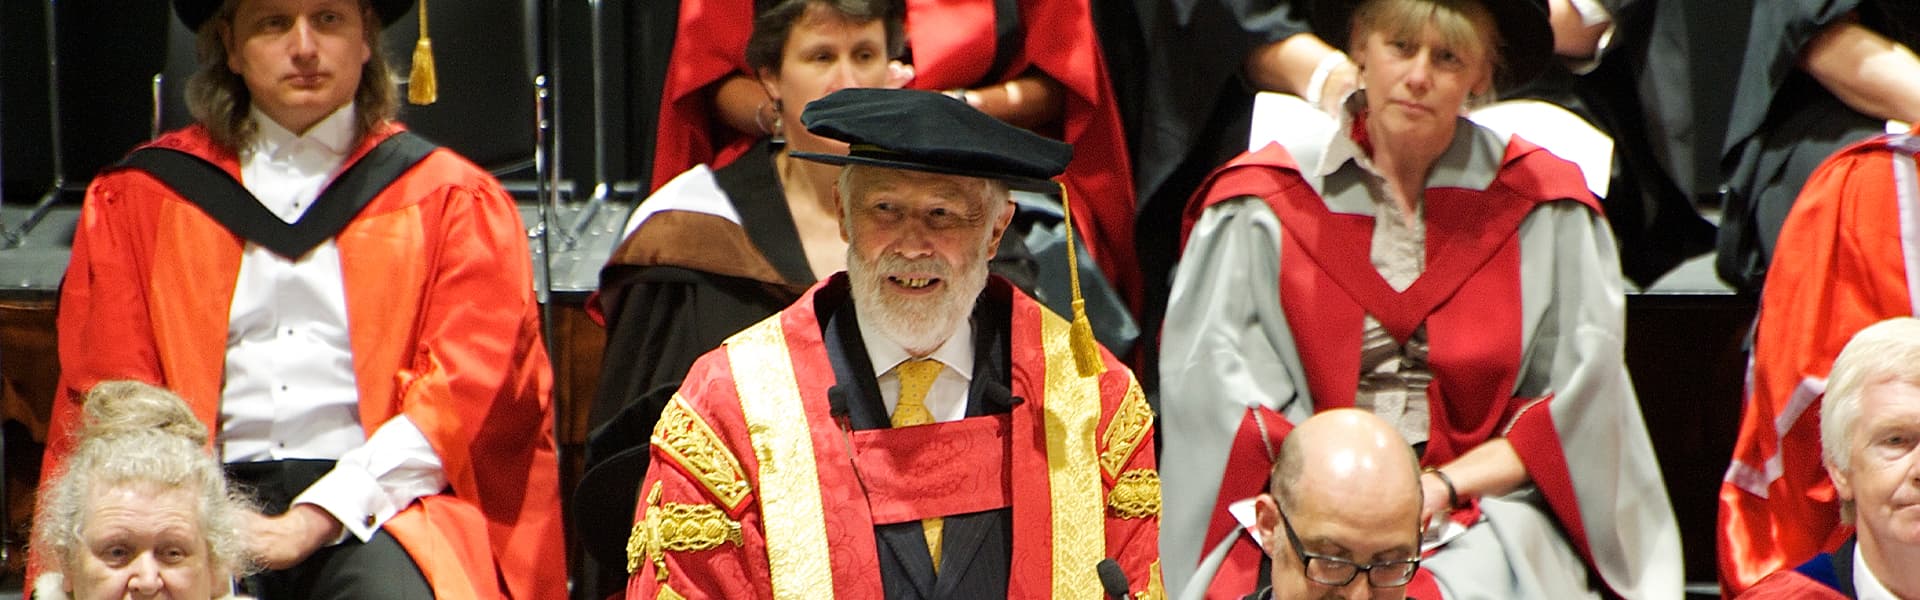 Chris Bonington in cap and gown at a graduation ceremony